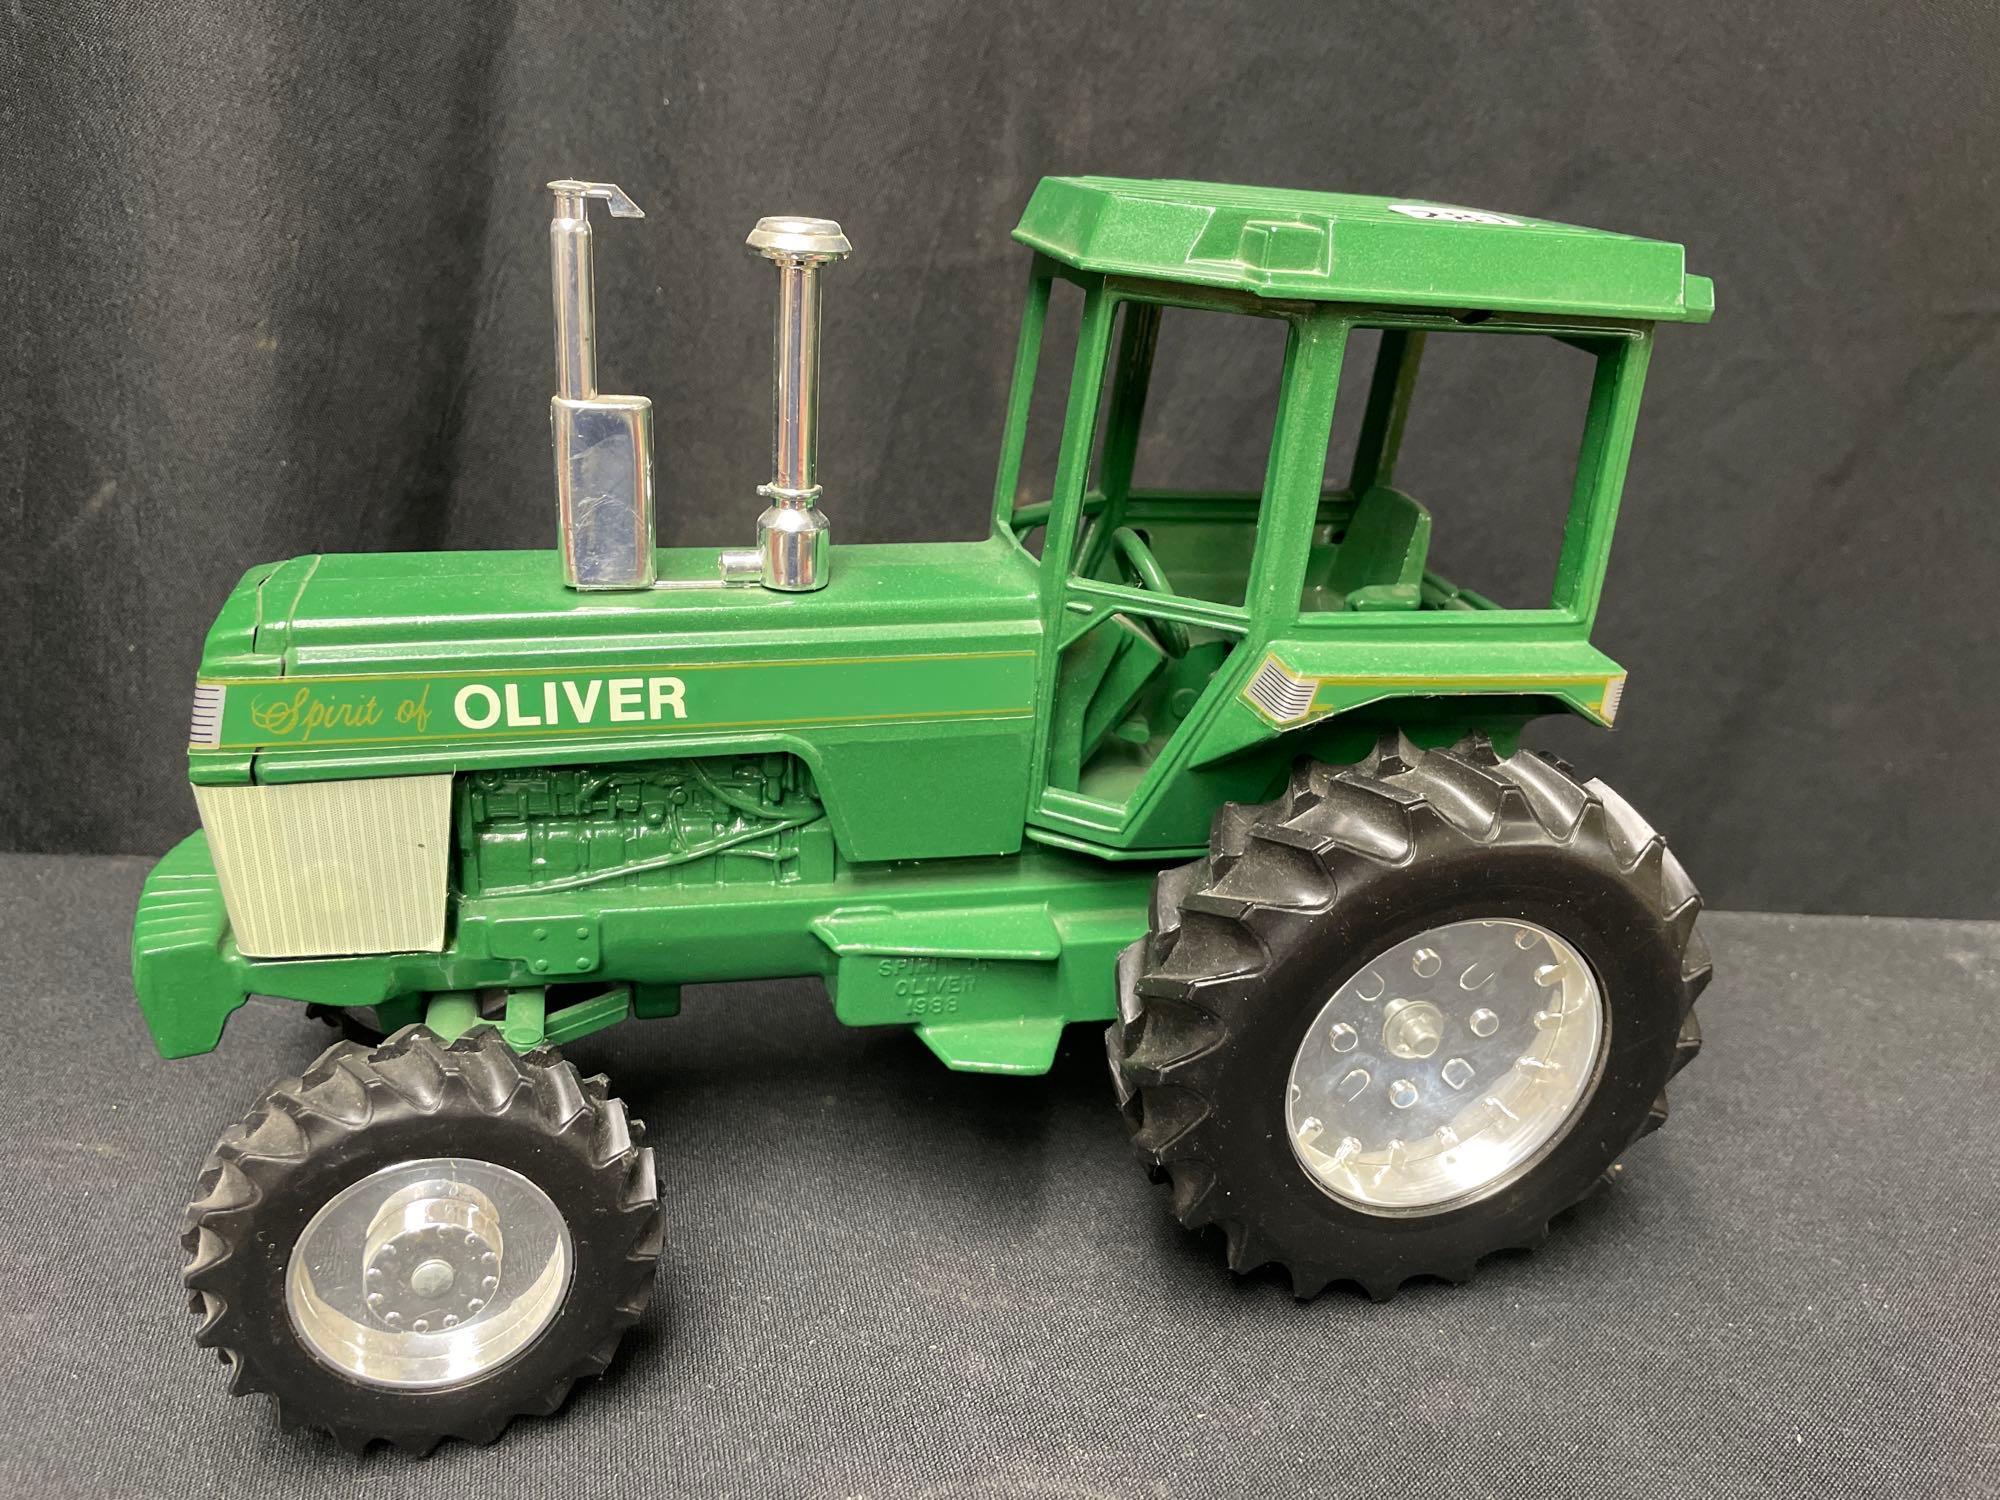 1/16th Scale Models 1988 Spirit of Oliver MFD Tractor w/chrome rims